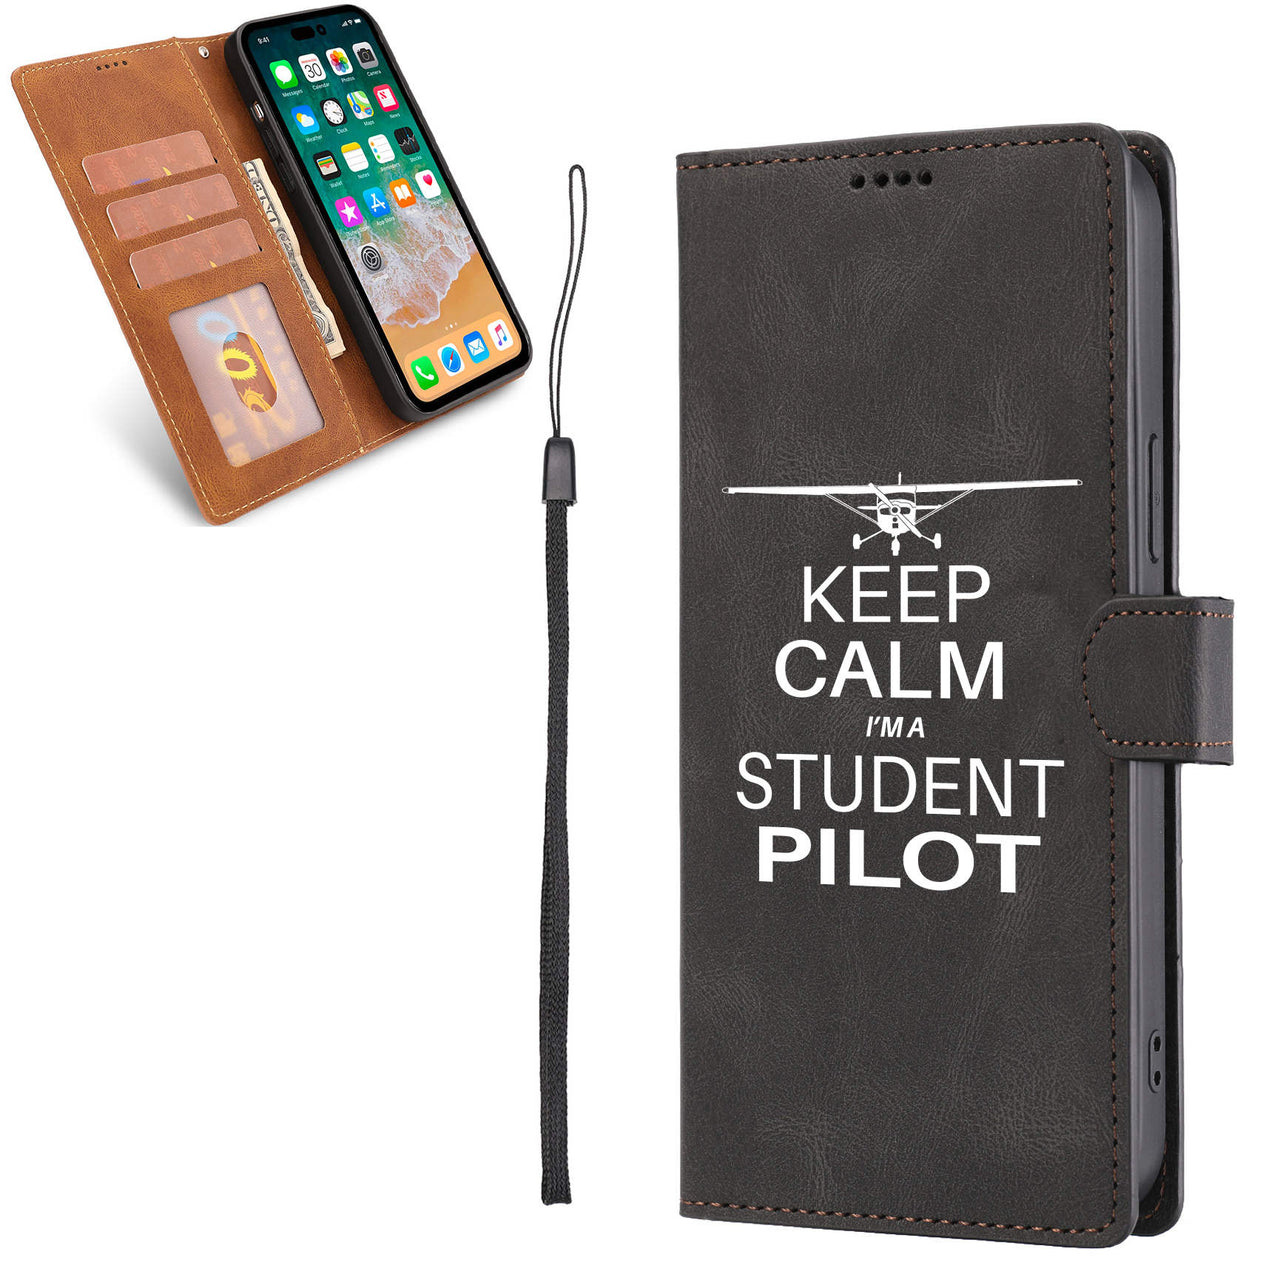 Student Pilot Designed Leather iPhone Cases